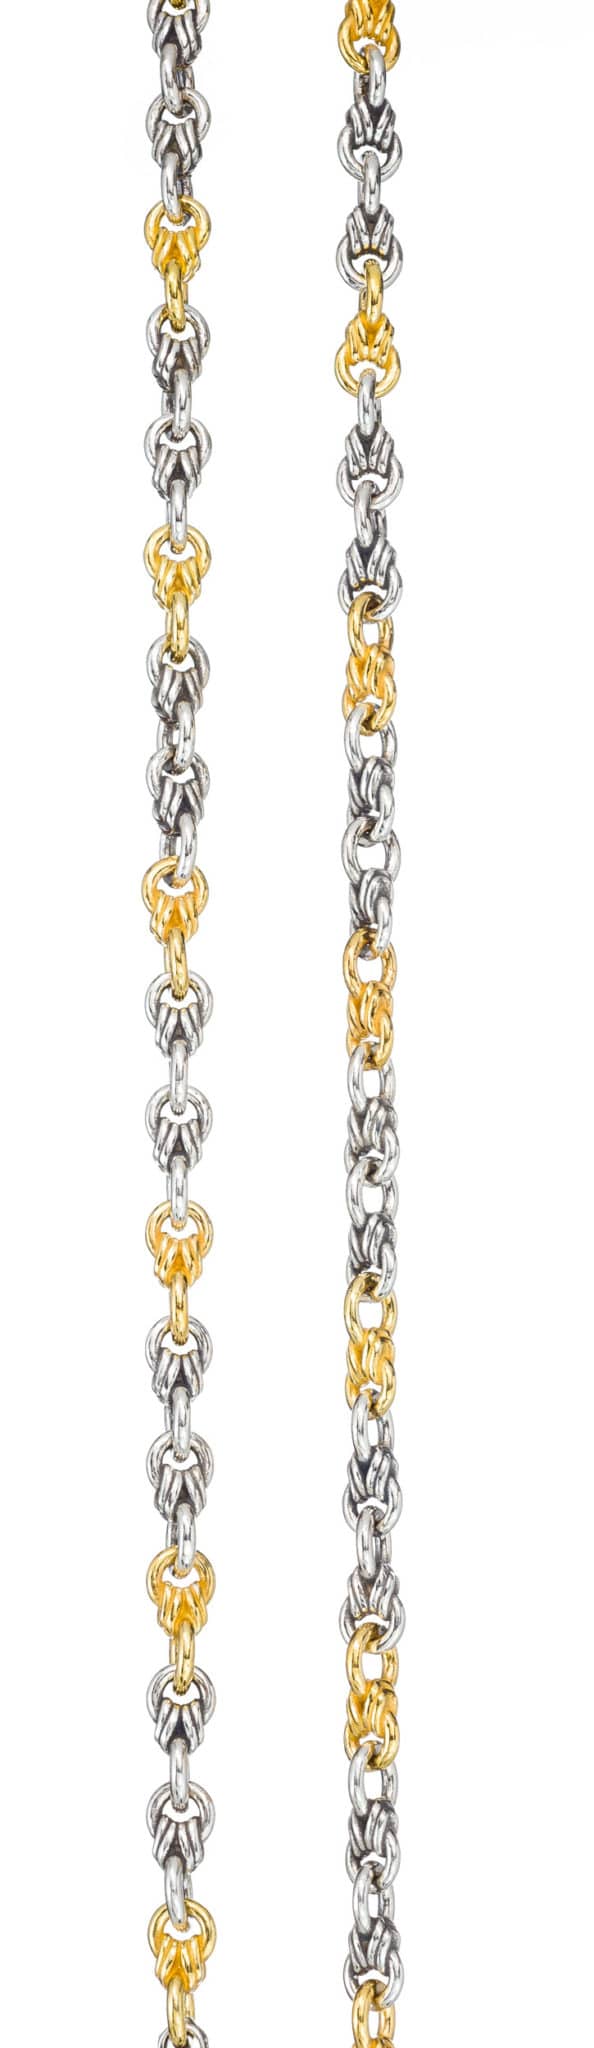 Chain in Sterling Silver with Gold Plated Parts